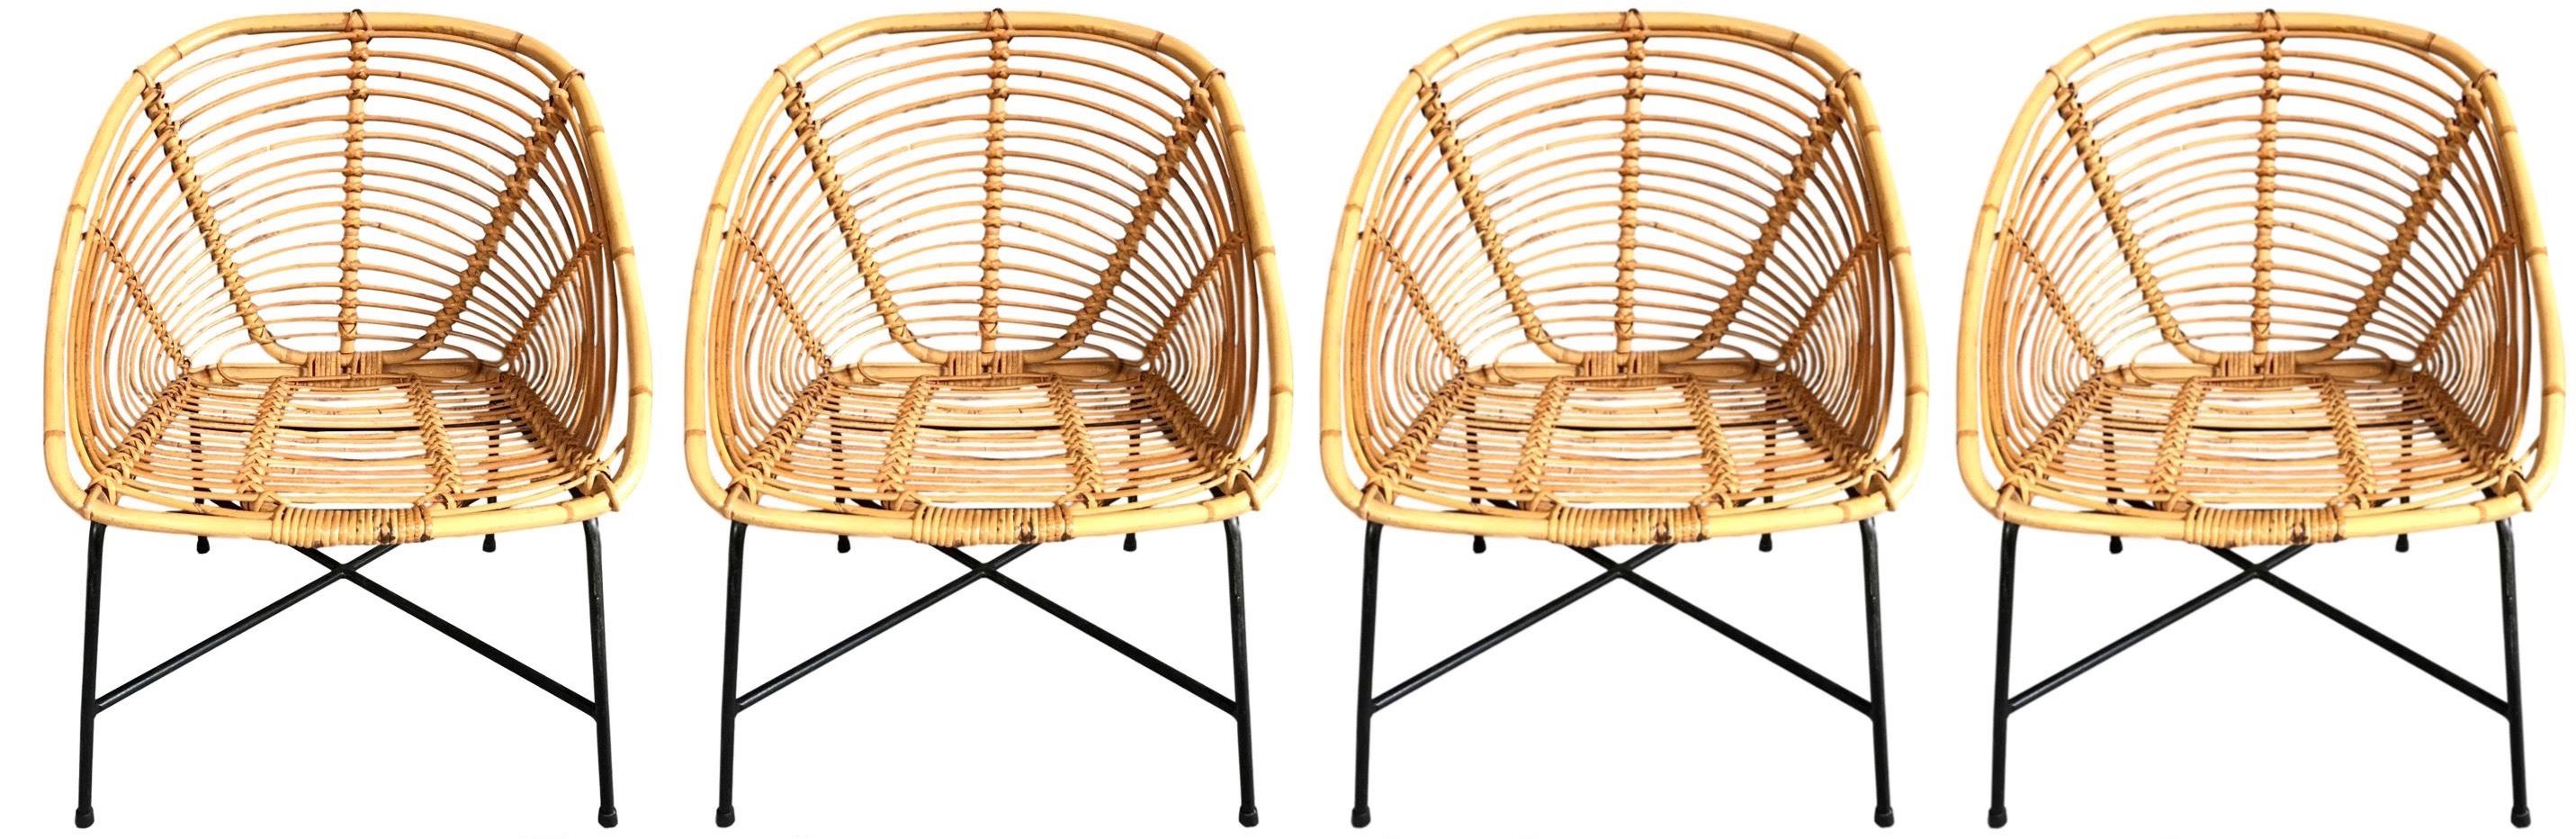 Set of Four Vintage French Wicker and Rattan Chairs, 1950s France